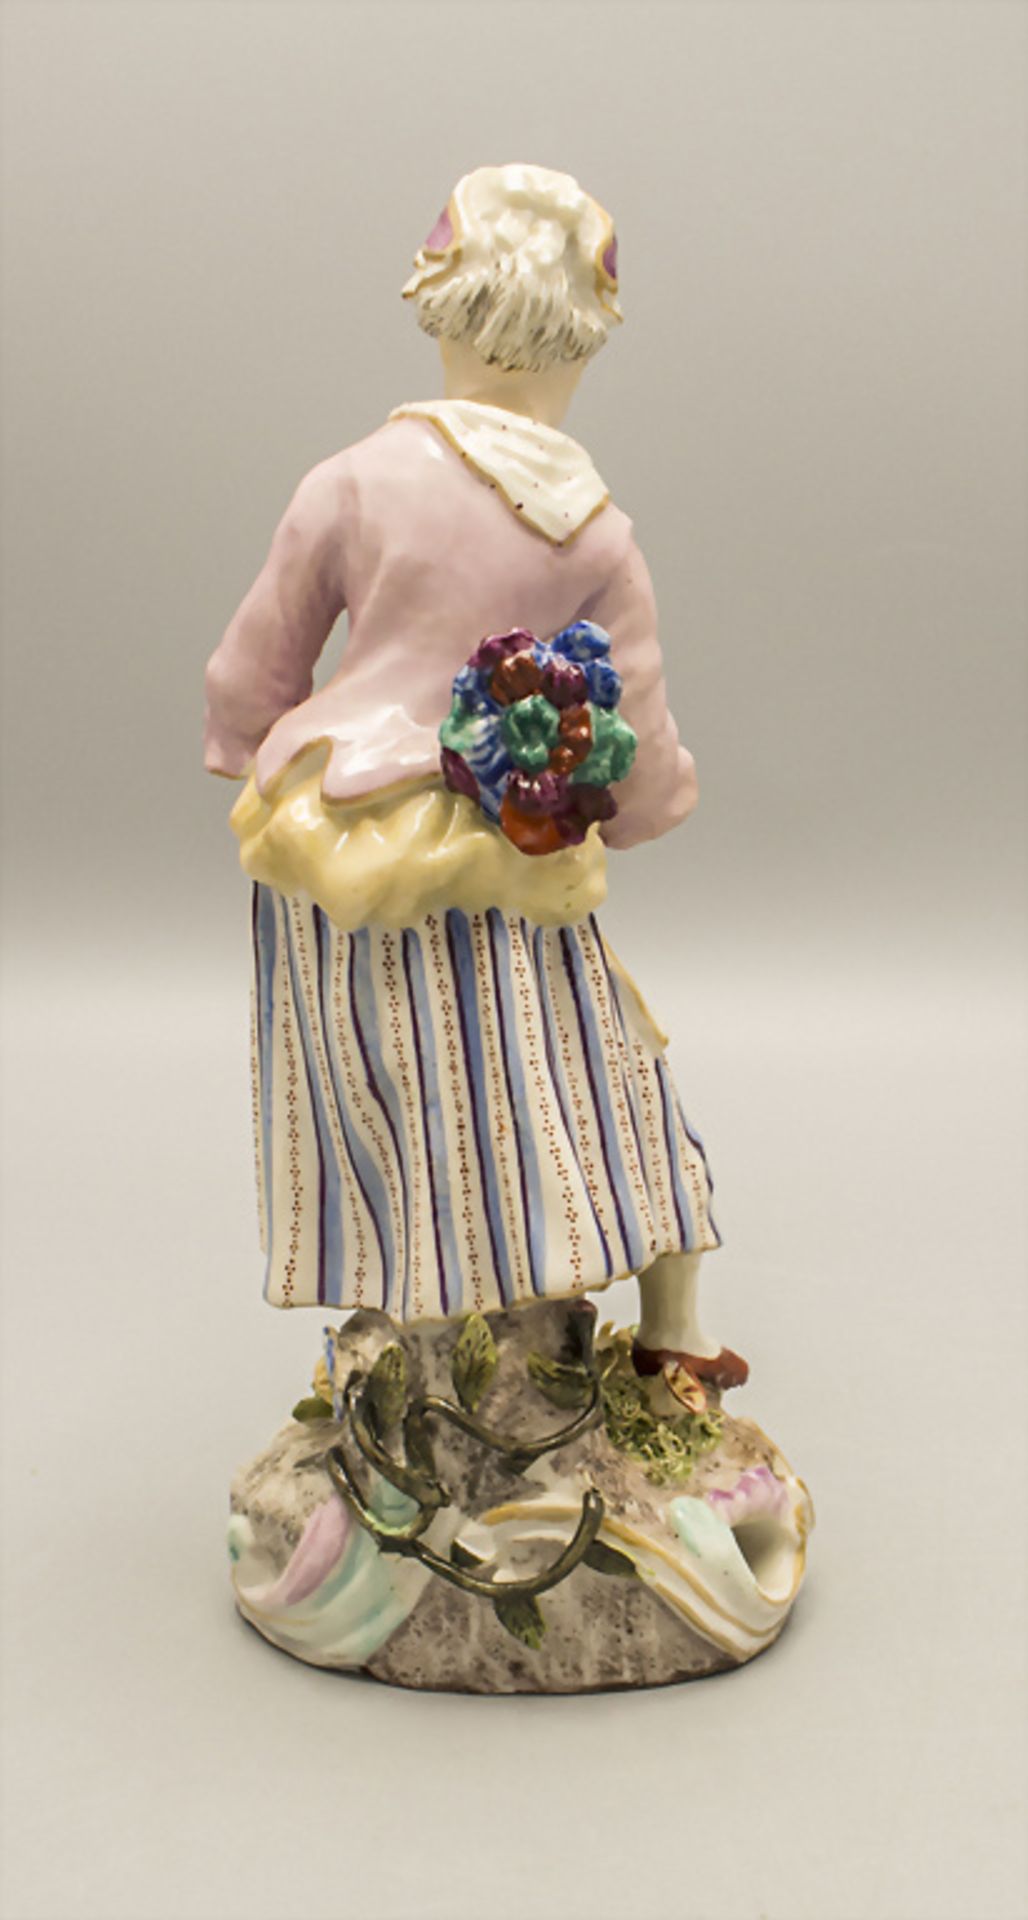 Figur eines Hausmädchens / A figure of a housemaid, wohl Ende 18. Jh. - Image 3 of 5